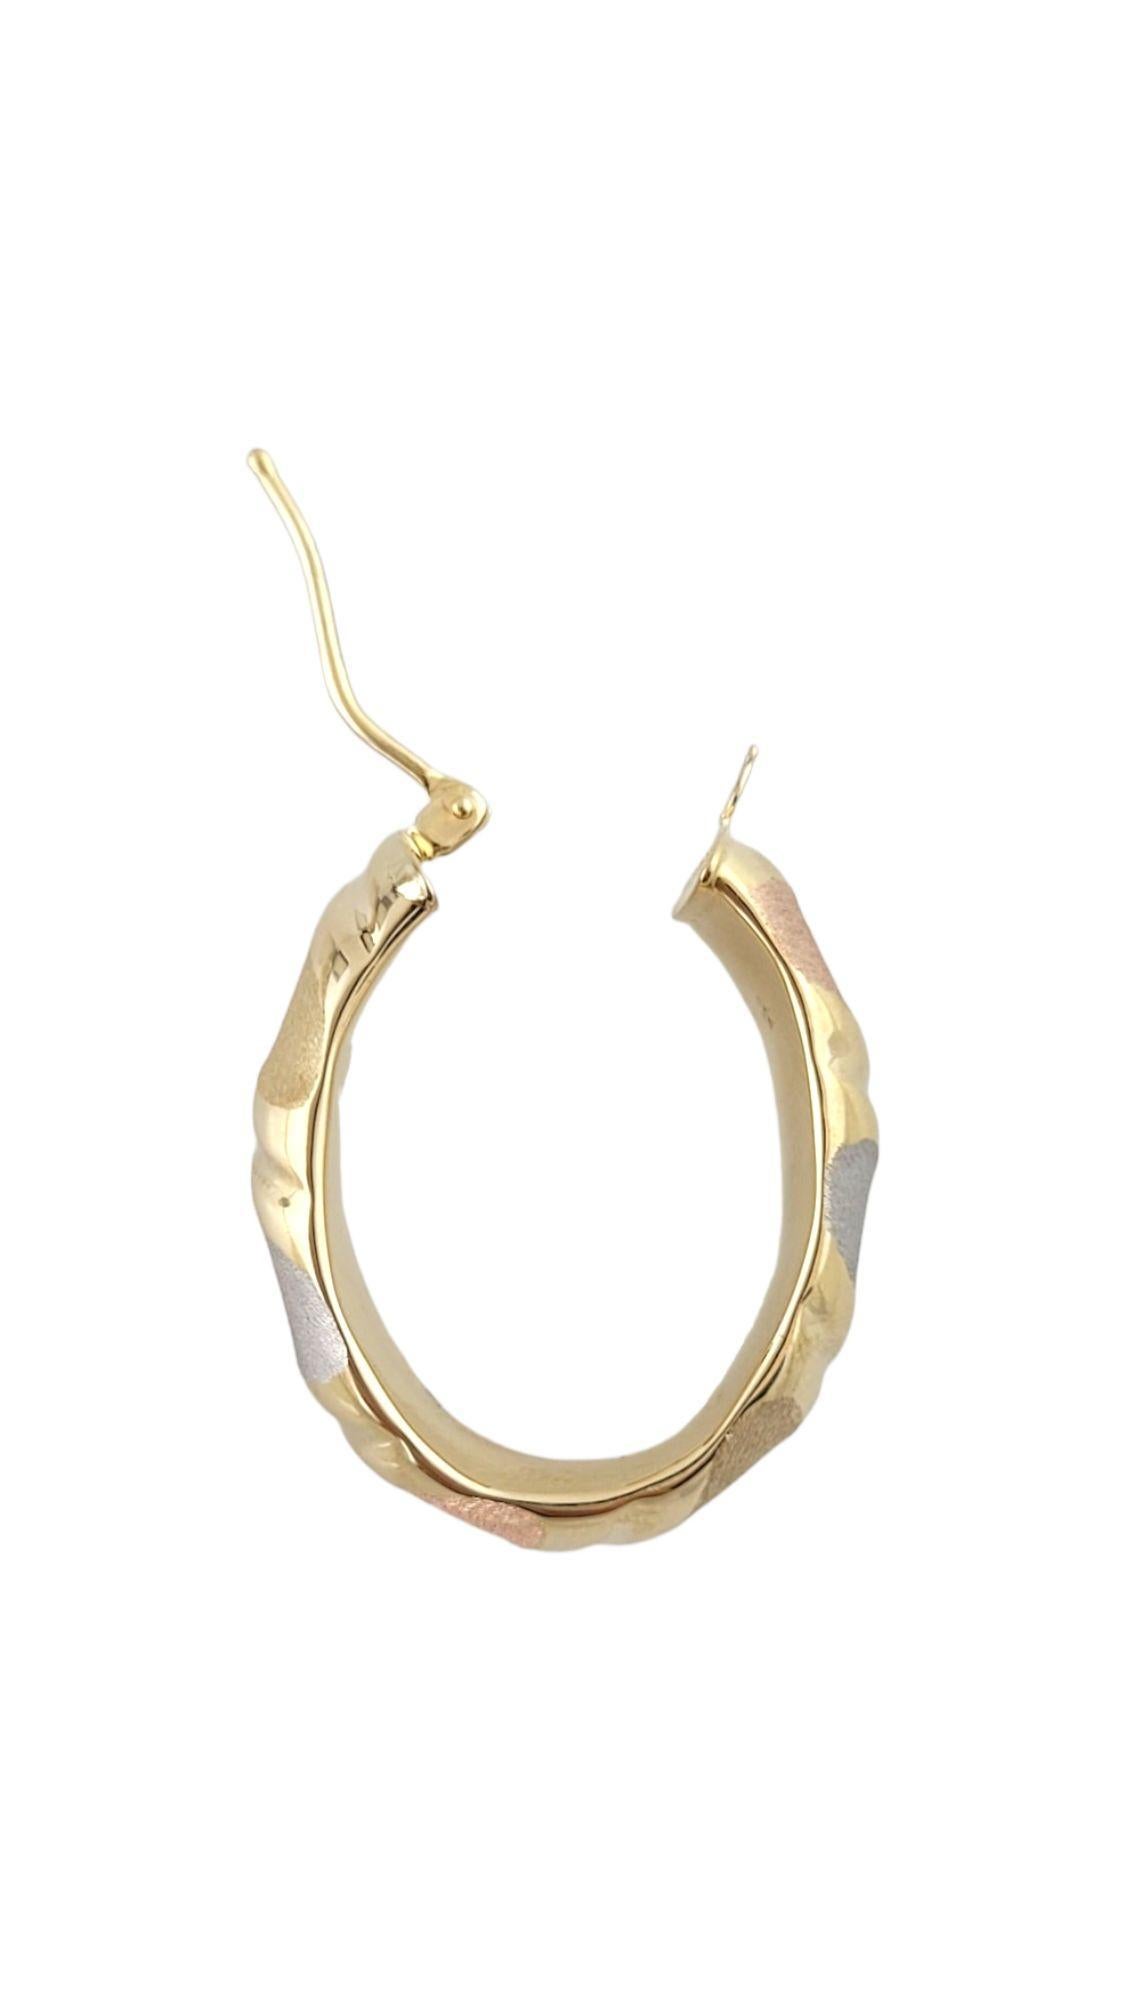 14K White, Yellow, and Rose Gold Tri-Color Hoop Earrings #14962 In Good Condition For Sale In Washington Depot, CT